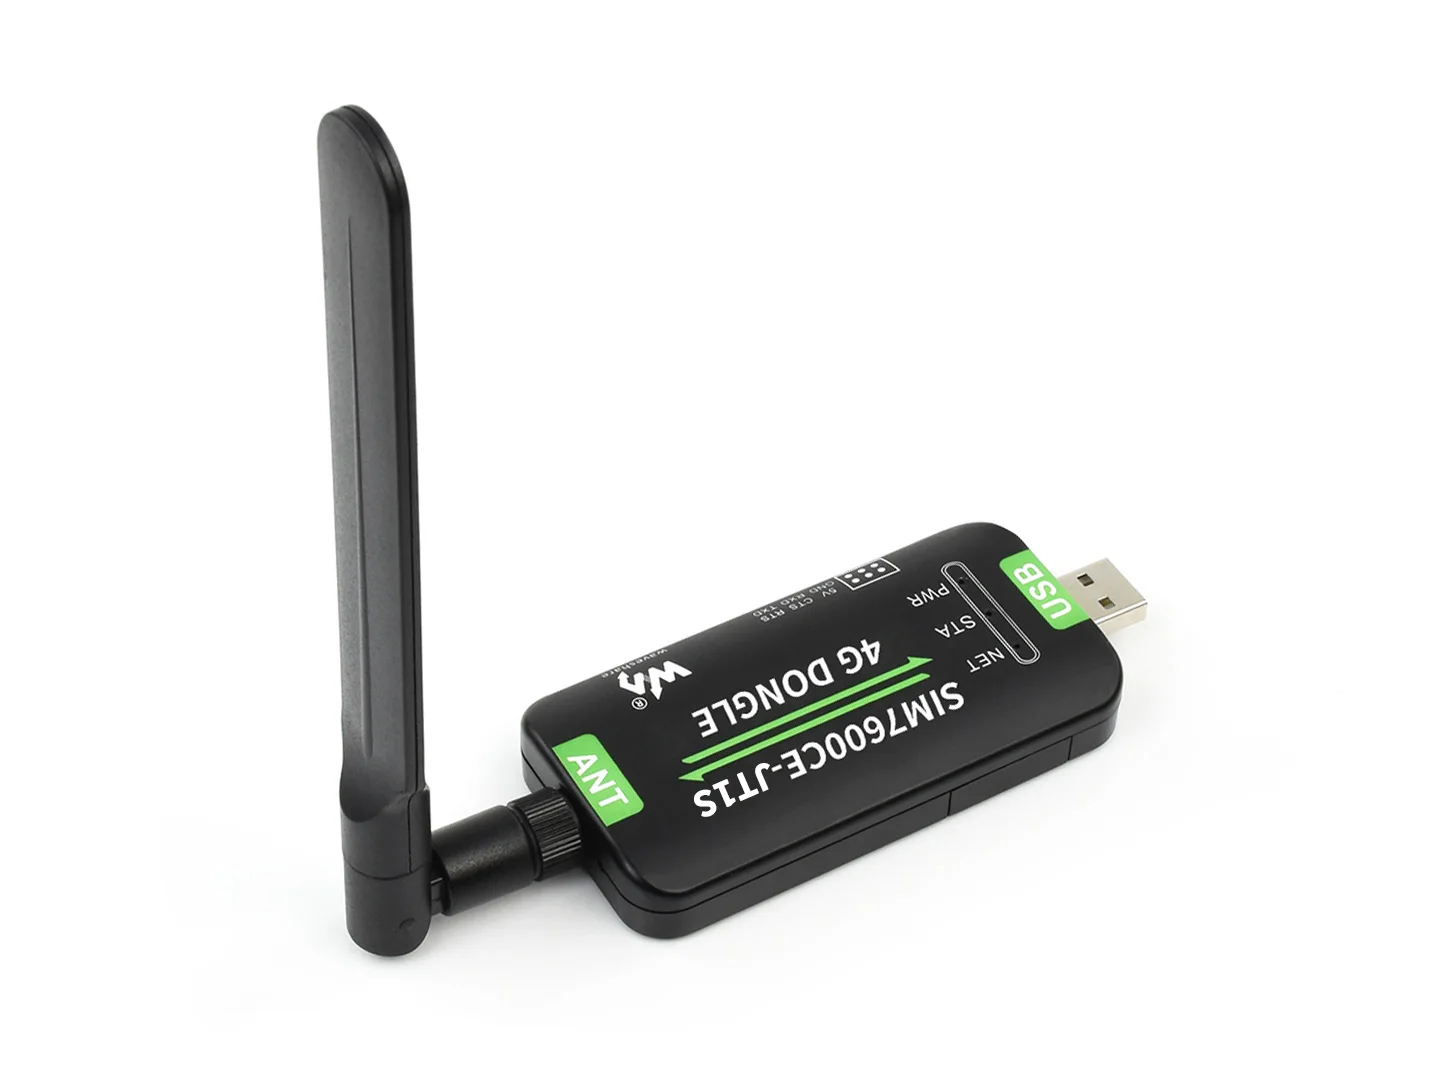 SIM7600CE-JT1S 4G DONGLE with antenna, industrial grade 4G communication peripheral, Mainly Applicable For China